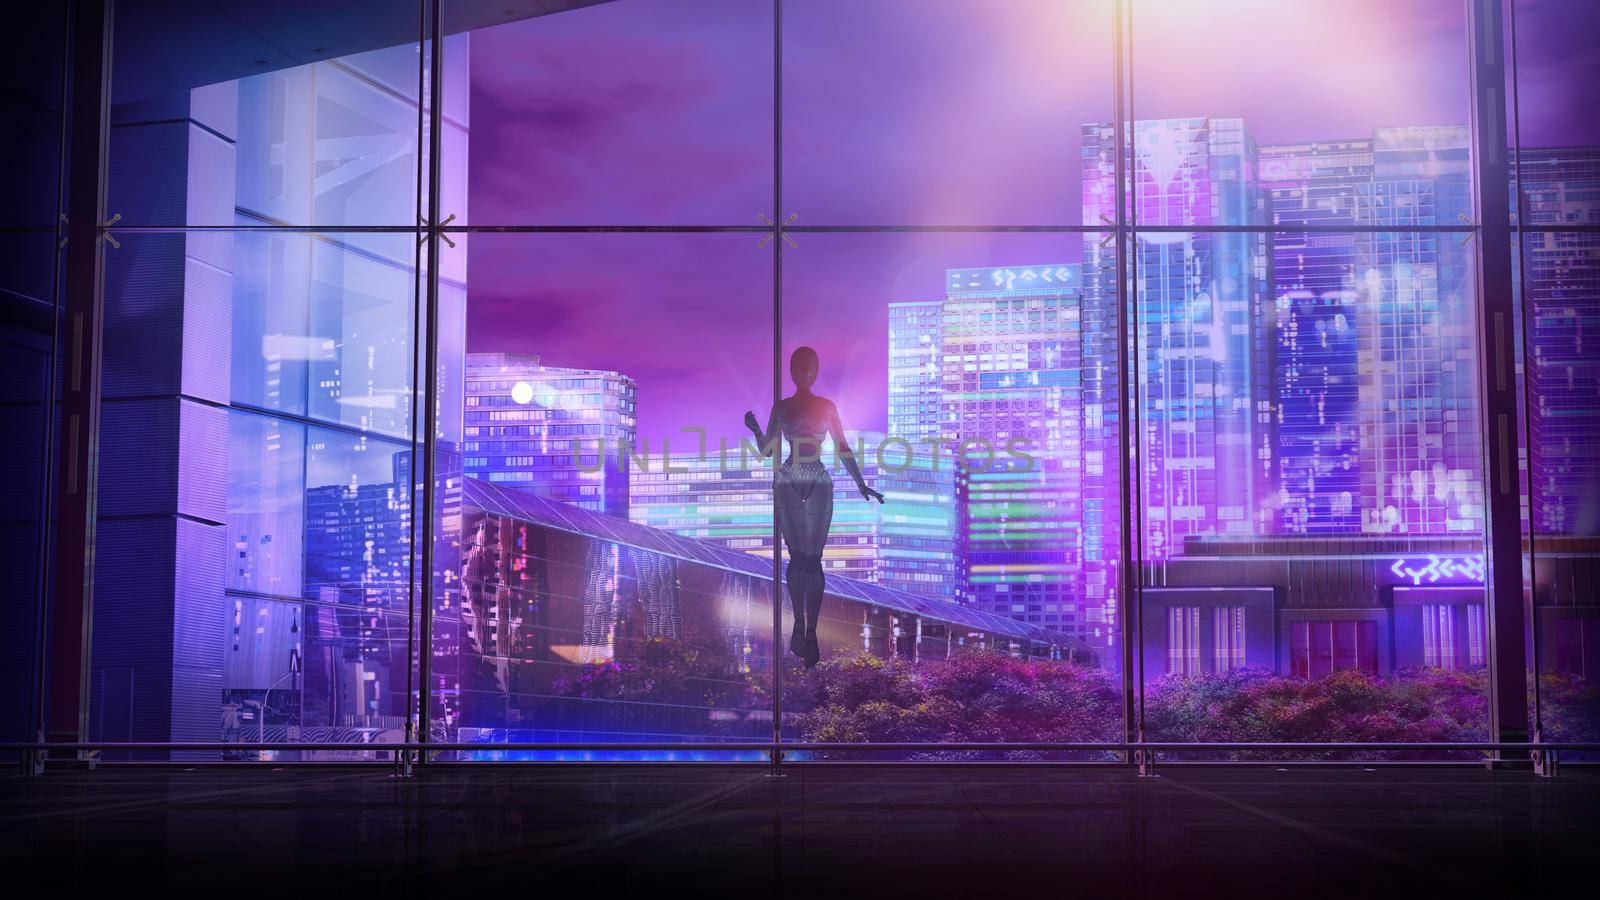 Flying robot in front of a window overlooking the night city, 3D render. by ConceptCafe